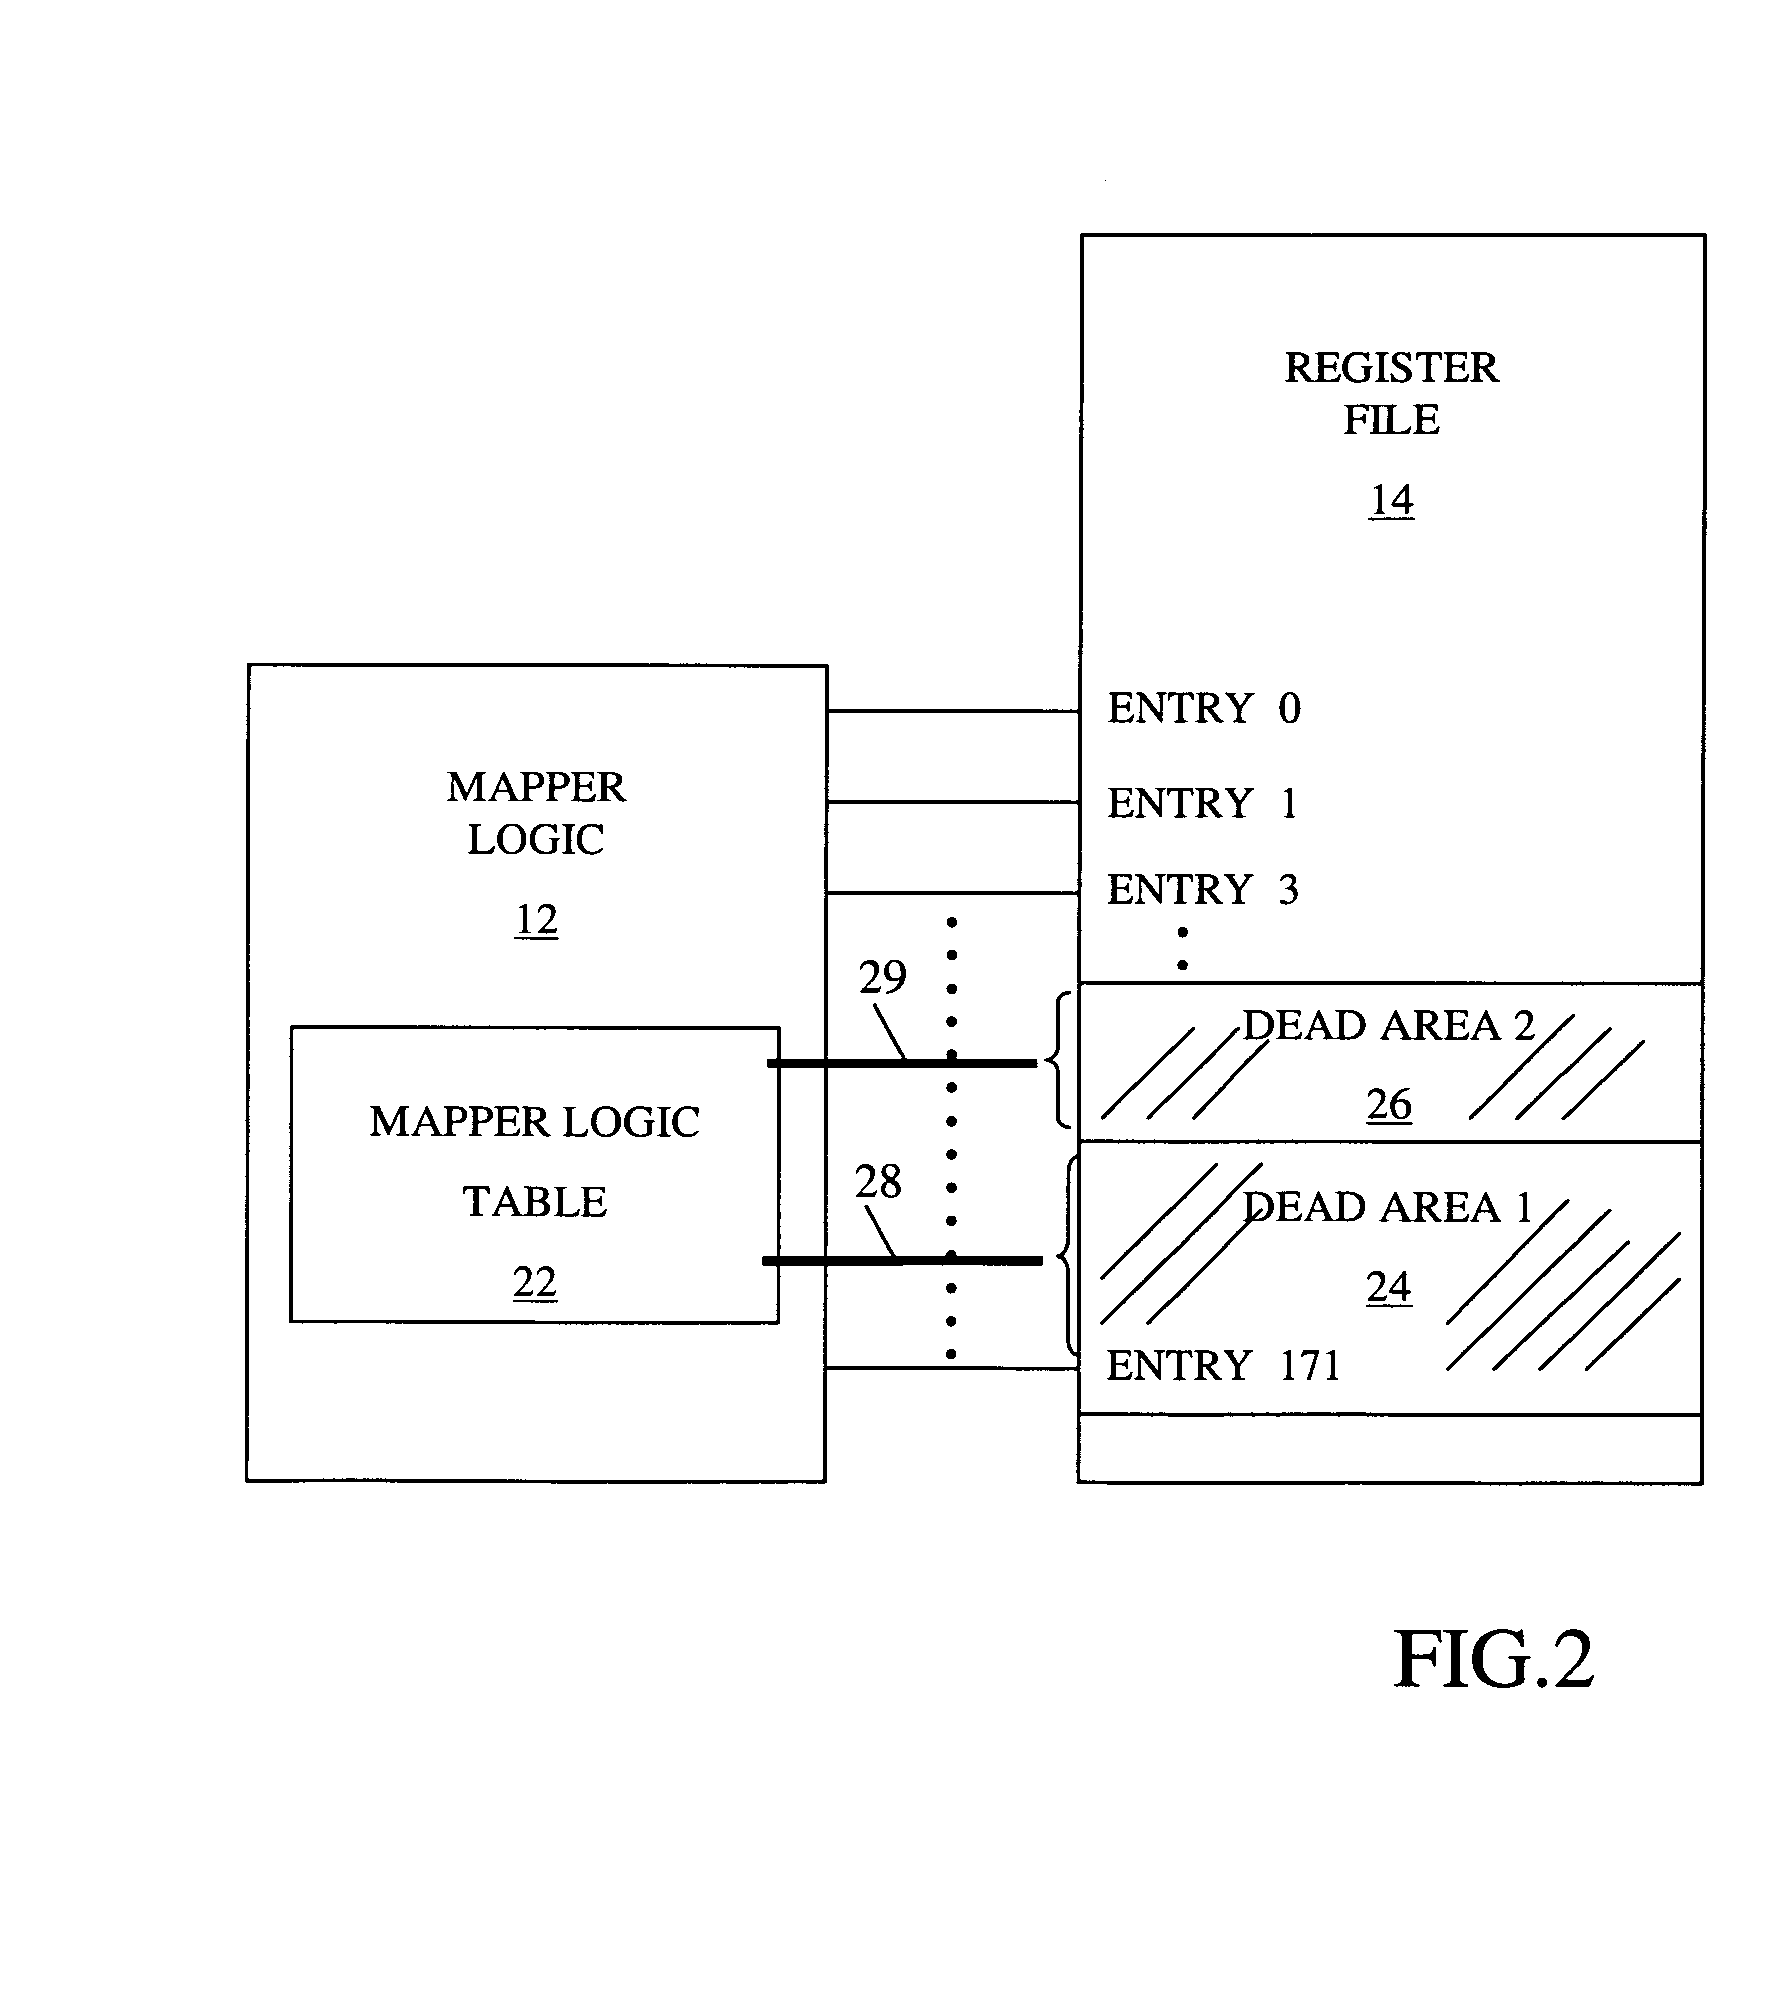 Method to Reduce Power Consumption of a Register File with Multi SMT Support